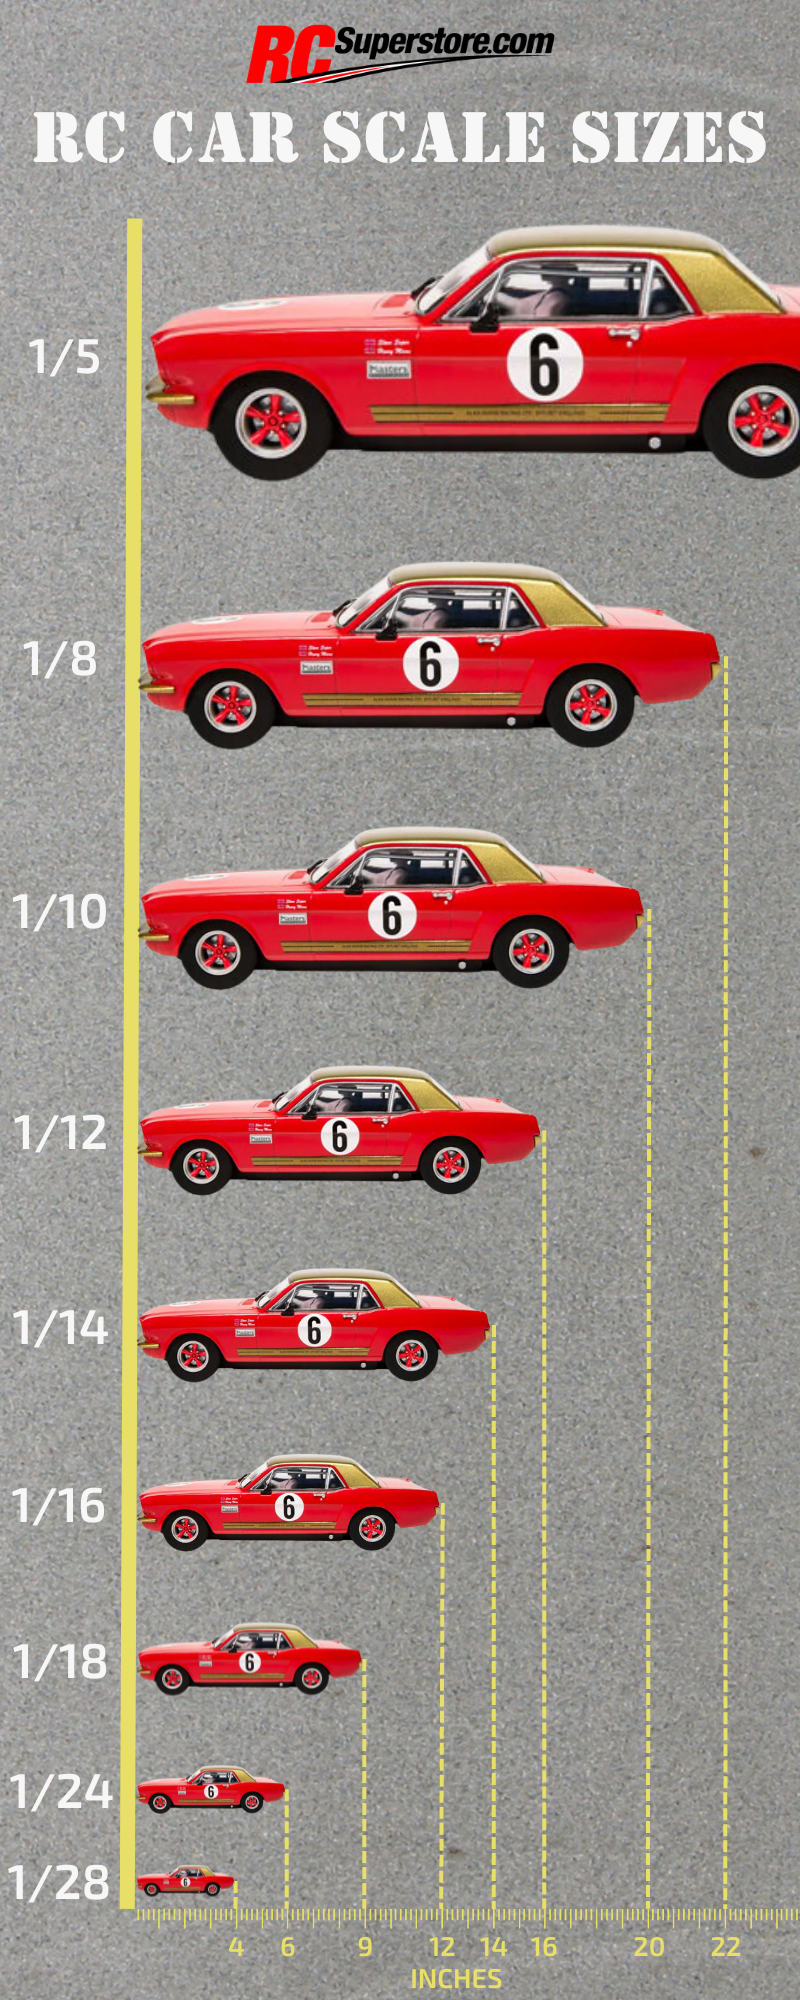 RC Car Scale Size Chart - Infographic